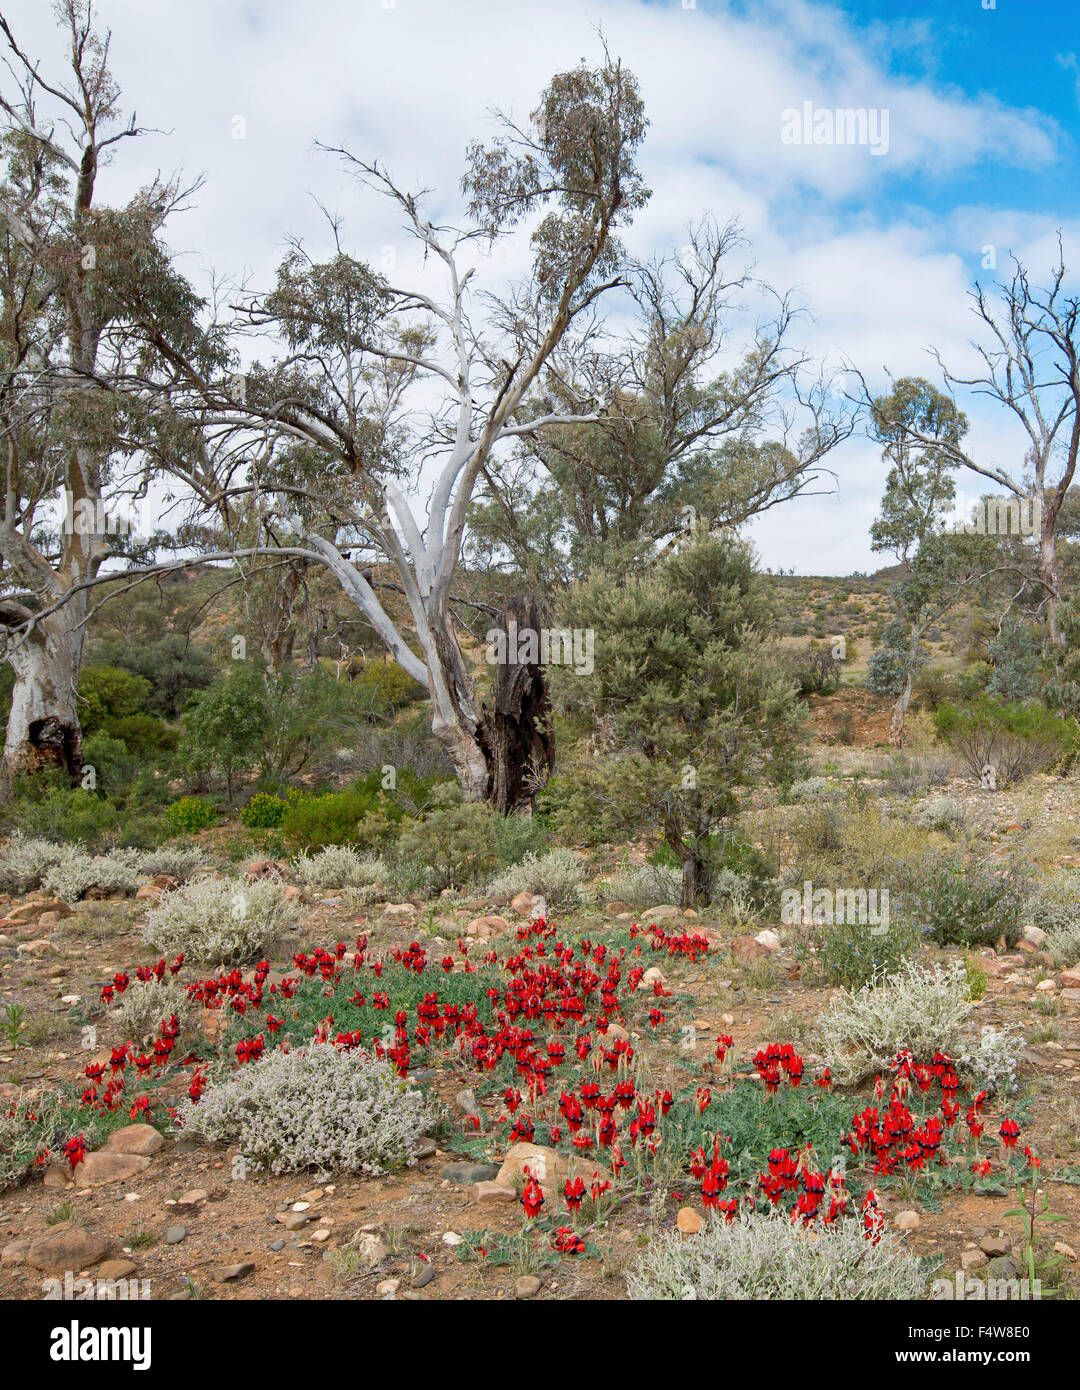 Colourful landscape in outback Australia with carpet of red flowers of Sturt's desert pea, Swainsona formosa & gum trees under blue sky Stock Photo